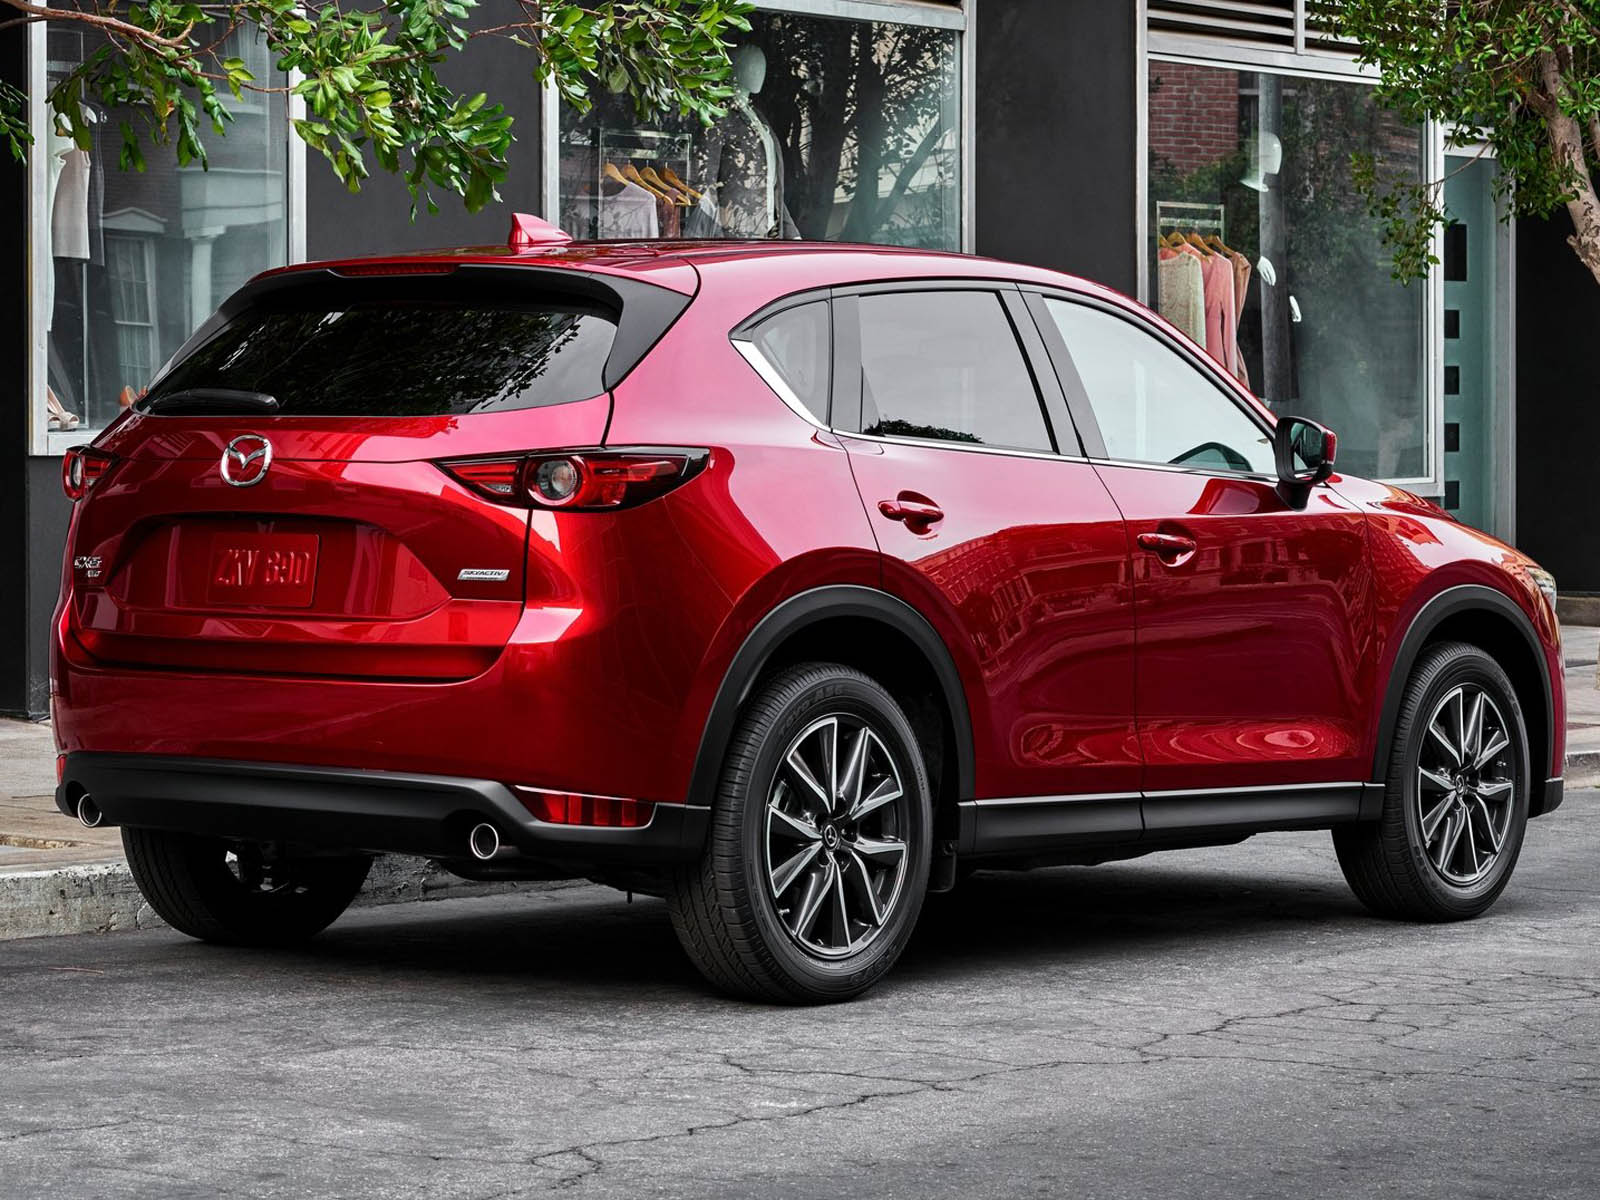 2017 Mazda CX-5 Starts $2,250 Higher Than Last Year's Model | Carscoops